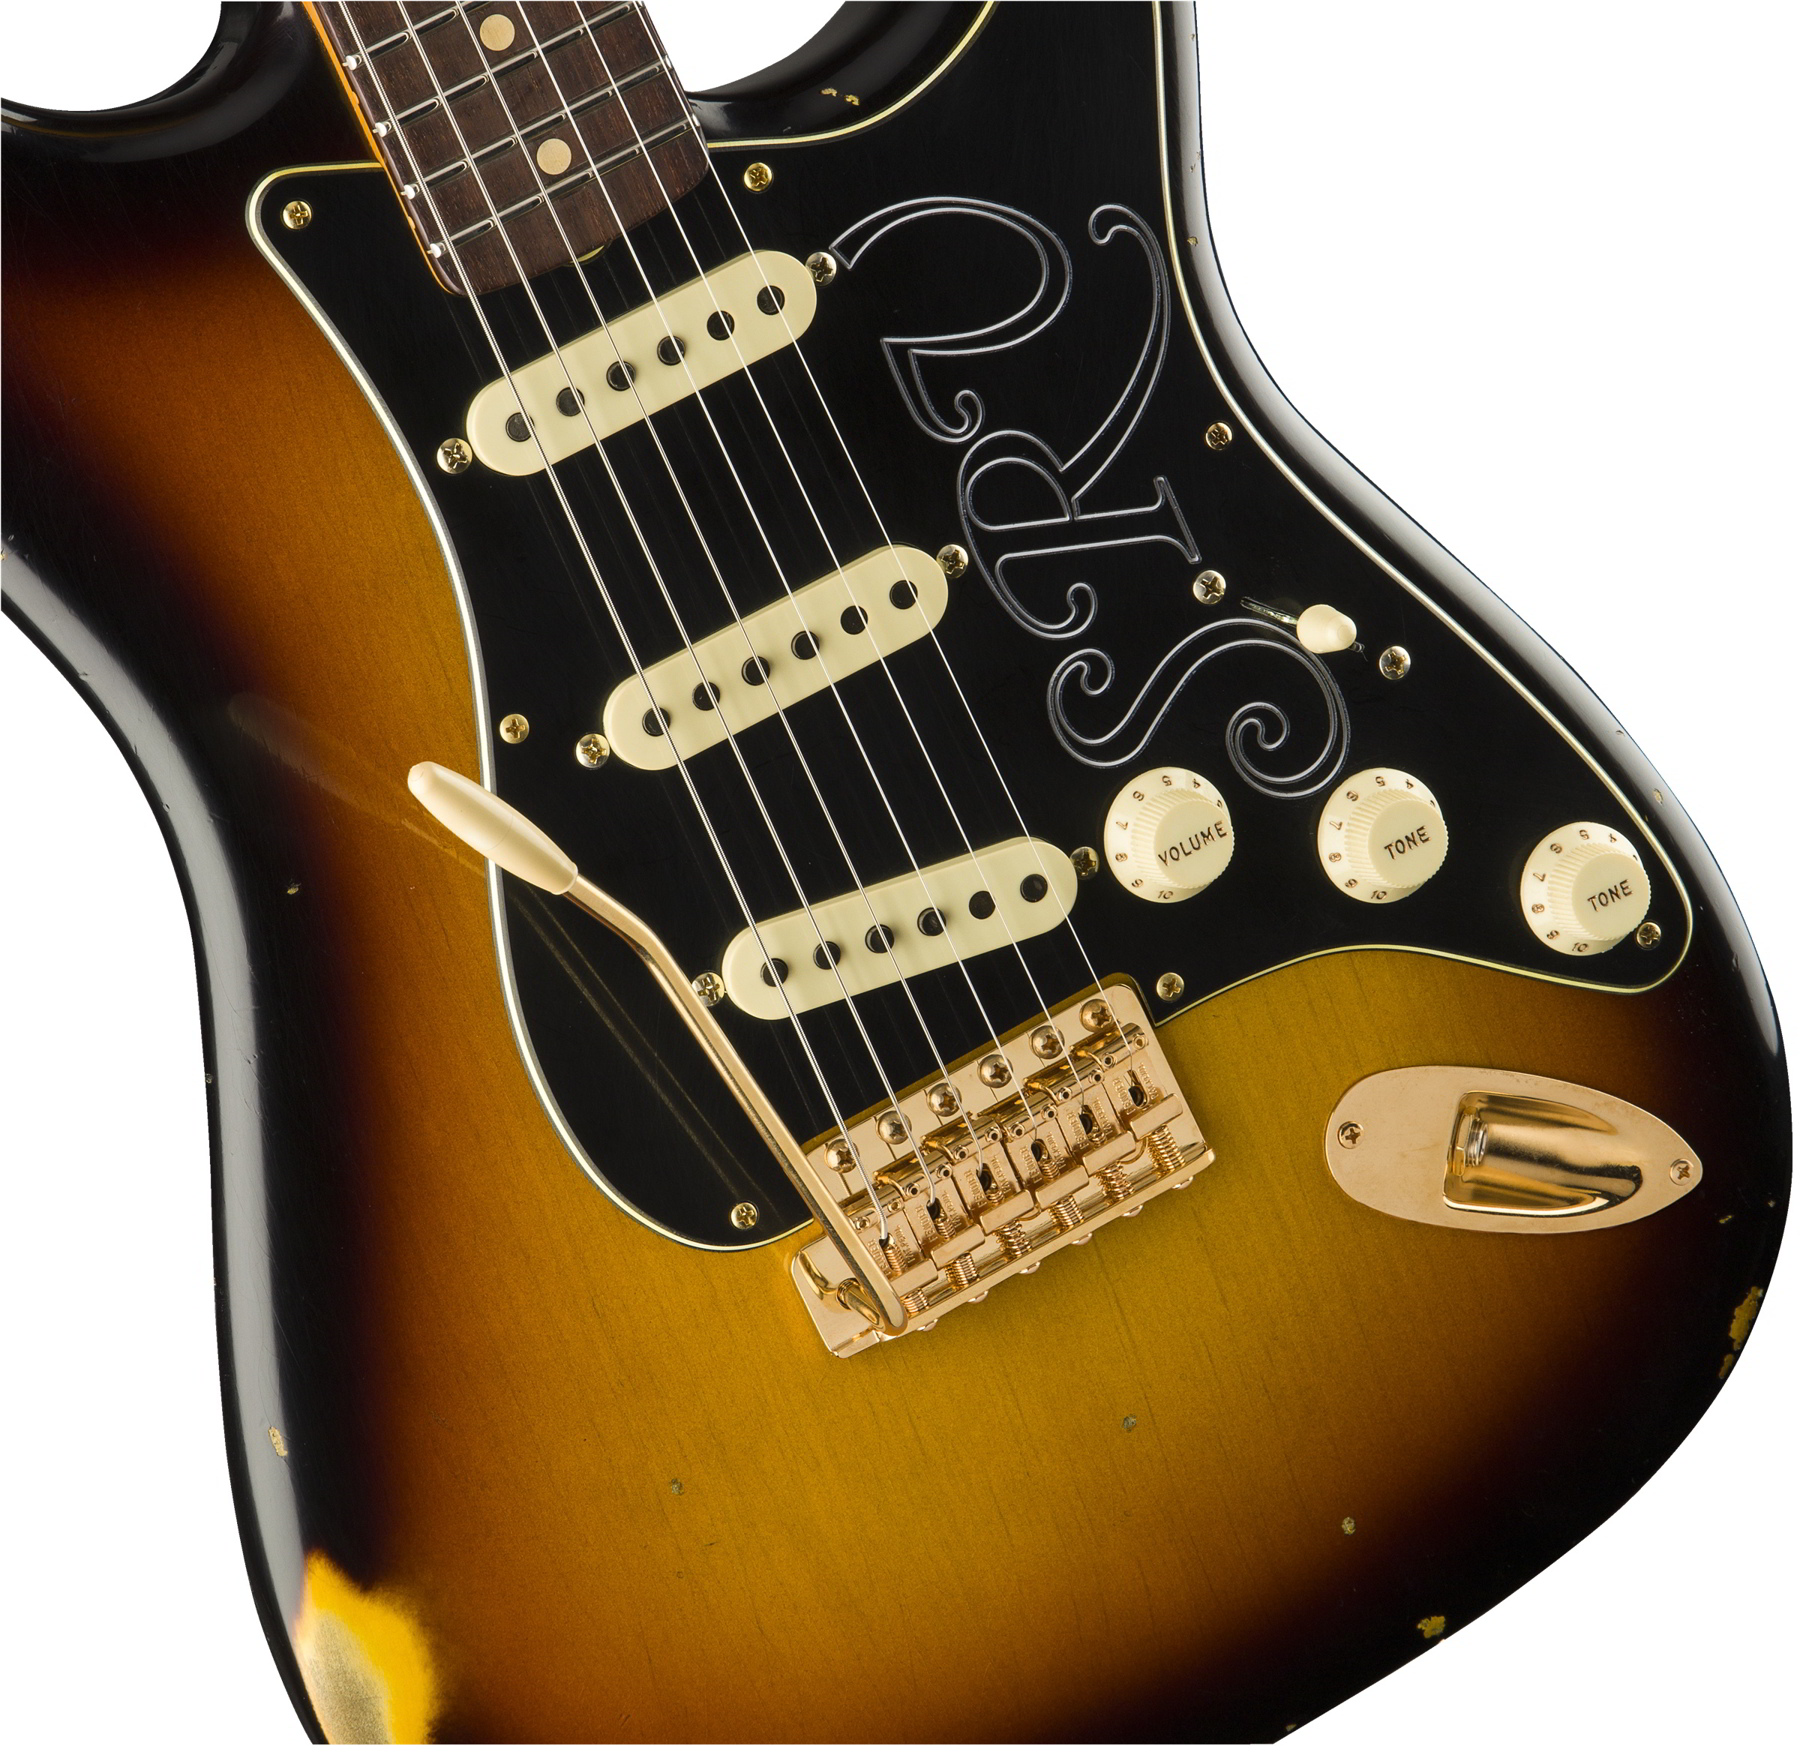 Stevie Ray Vaughan Signature Stratocaster Relic, Rosewood Fingerboard, Faded 3-Color Sunburst追加画像